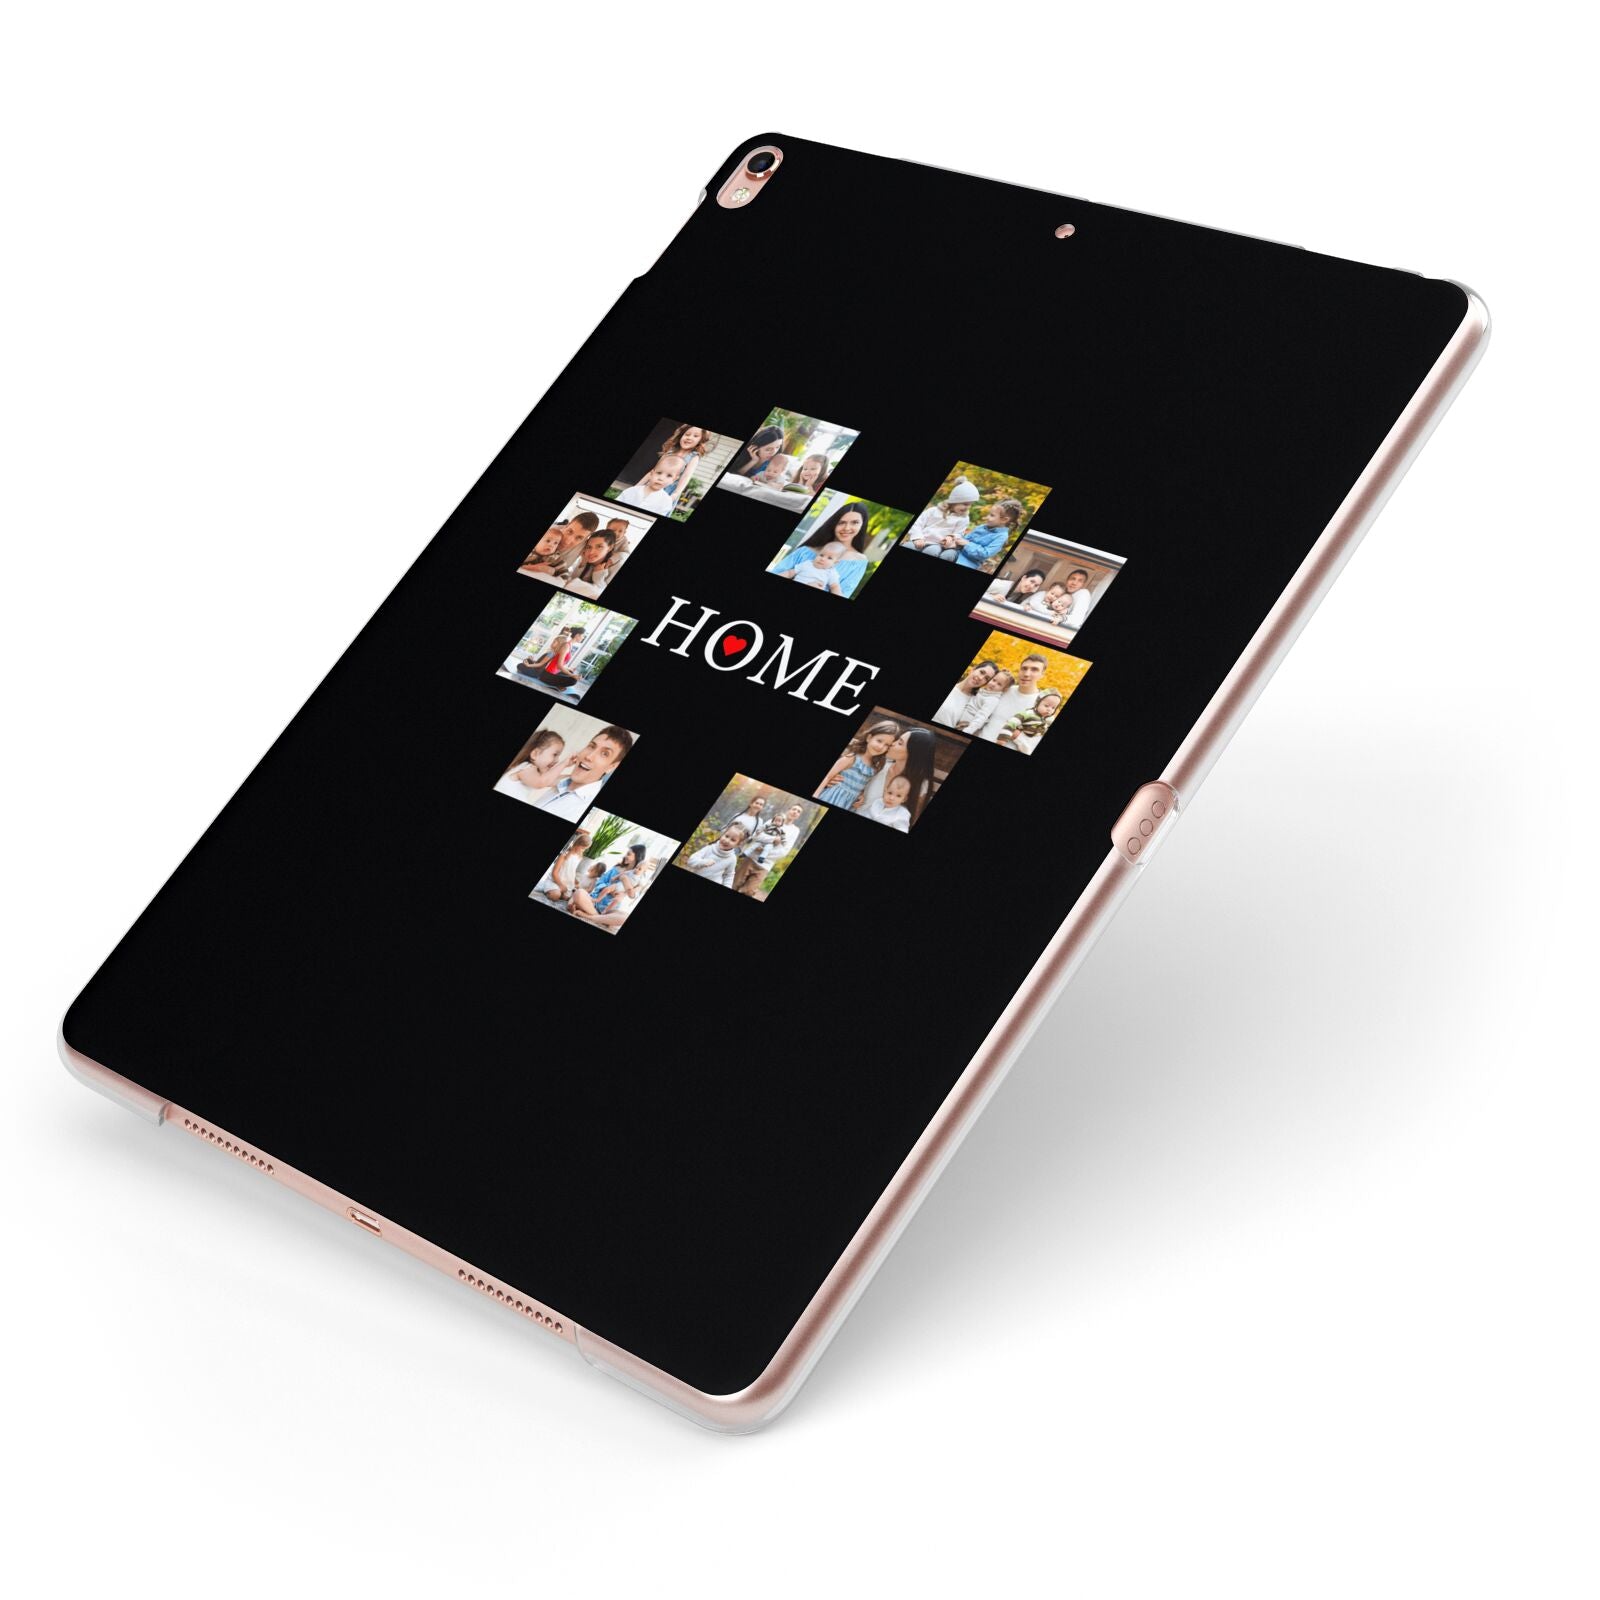 Photos of Home Personalised Apple iPad Case on Rose Gold iPad Side View